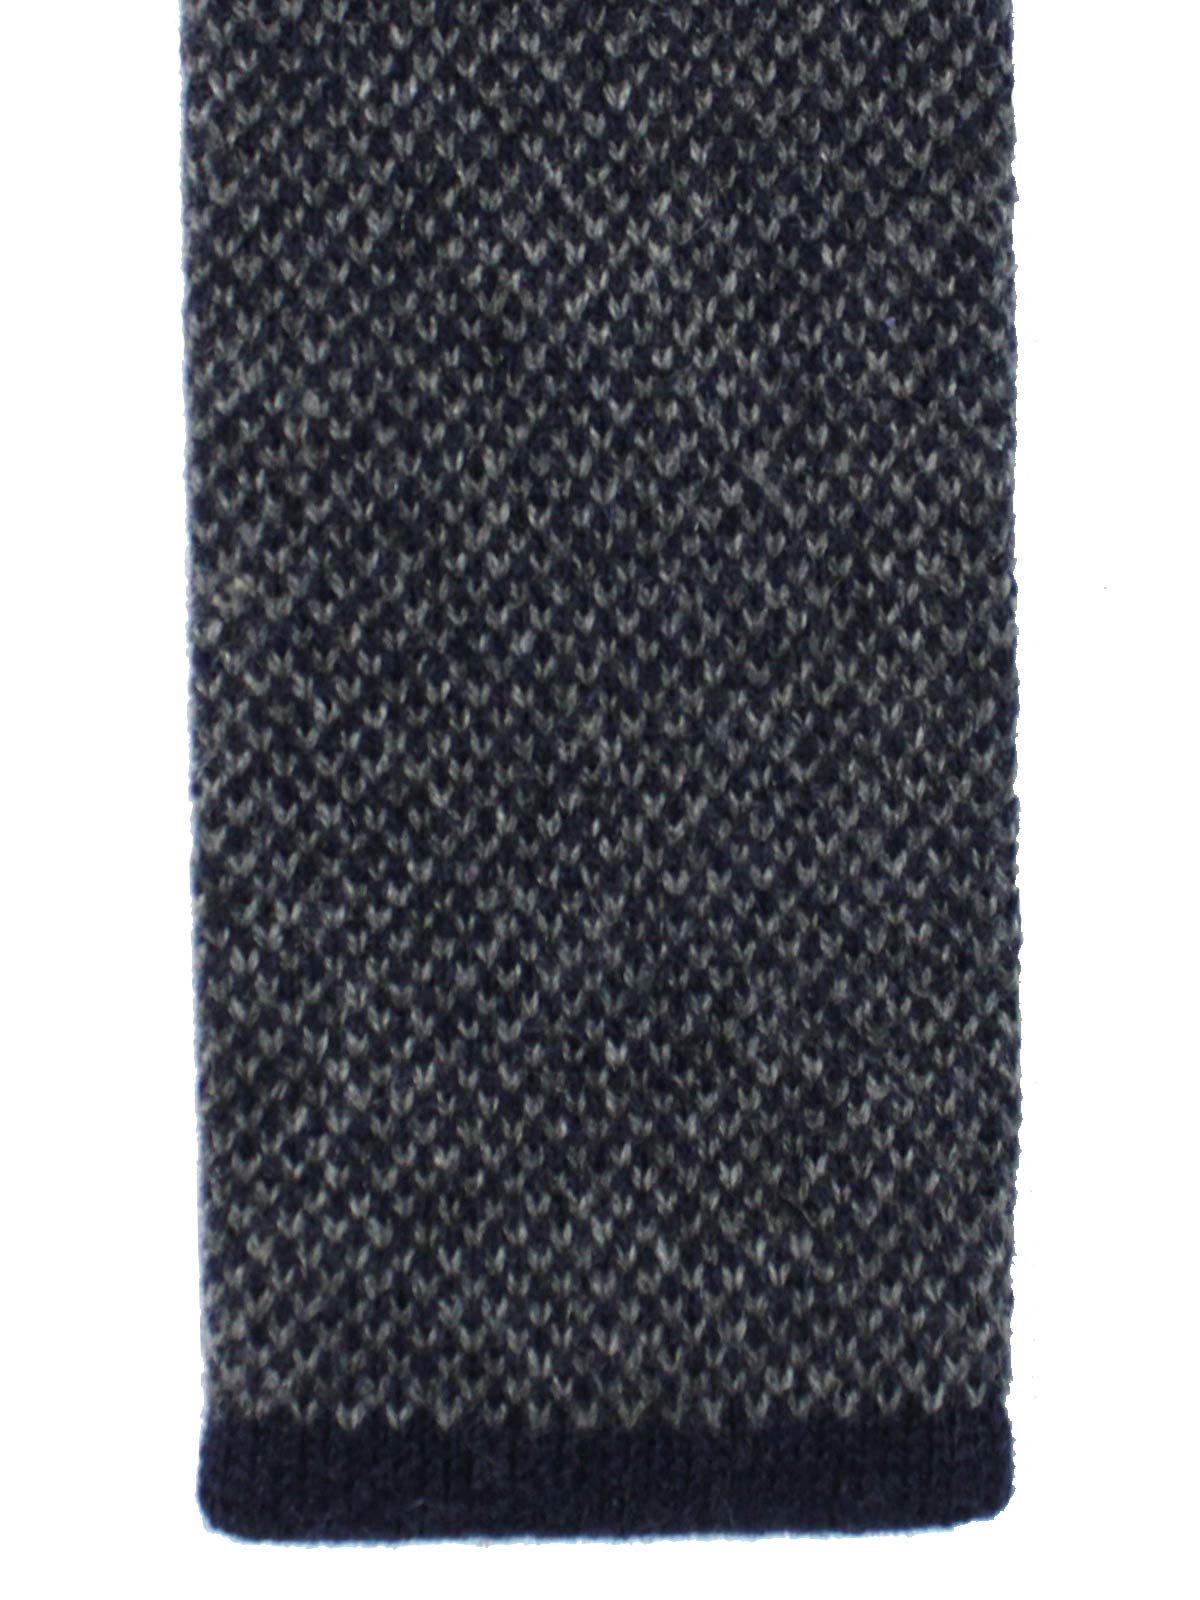 Brunello Cucinelli Cashmere Square End Knitted Tie Charcoal Gray